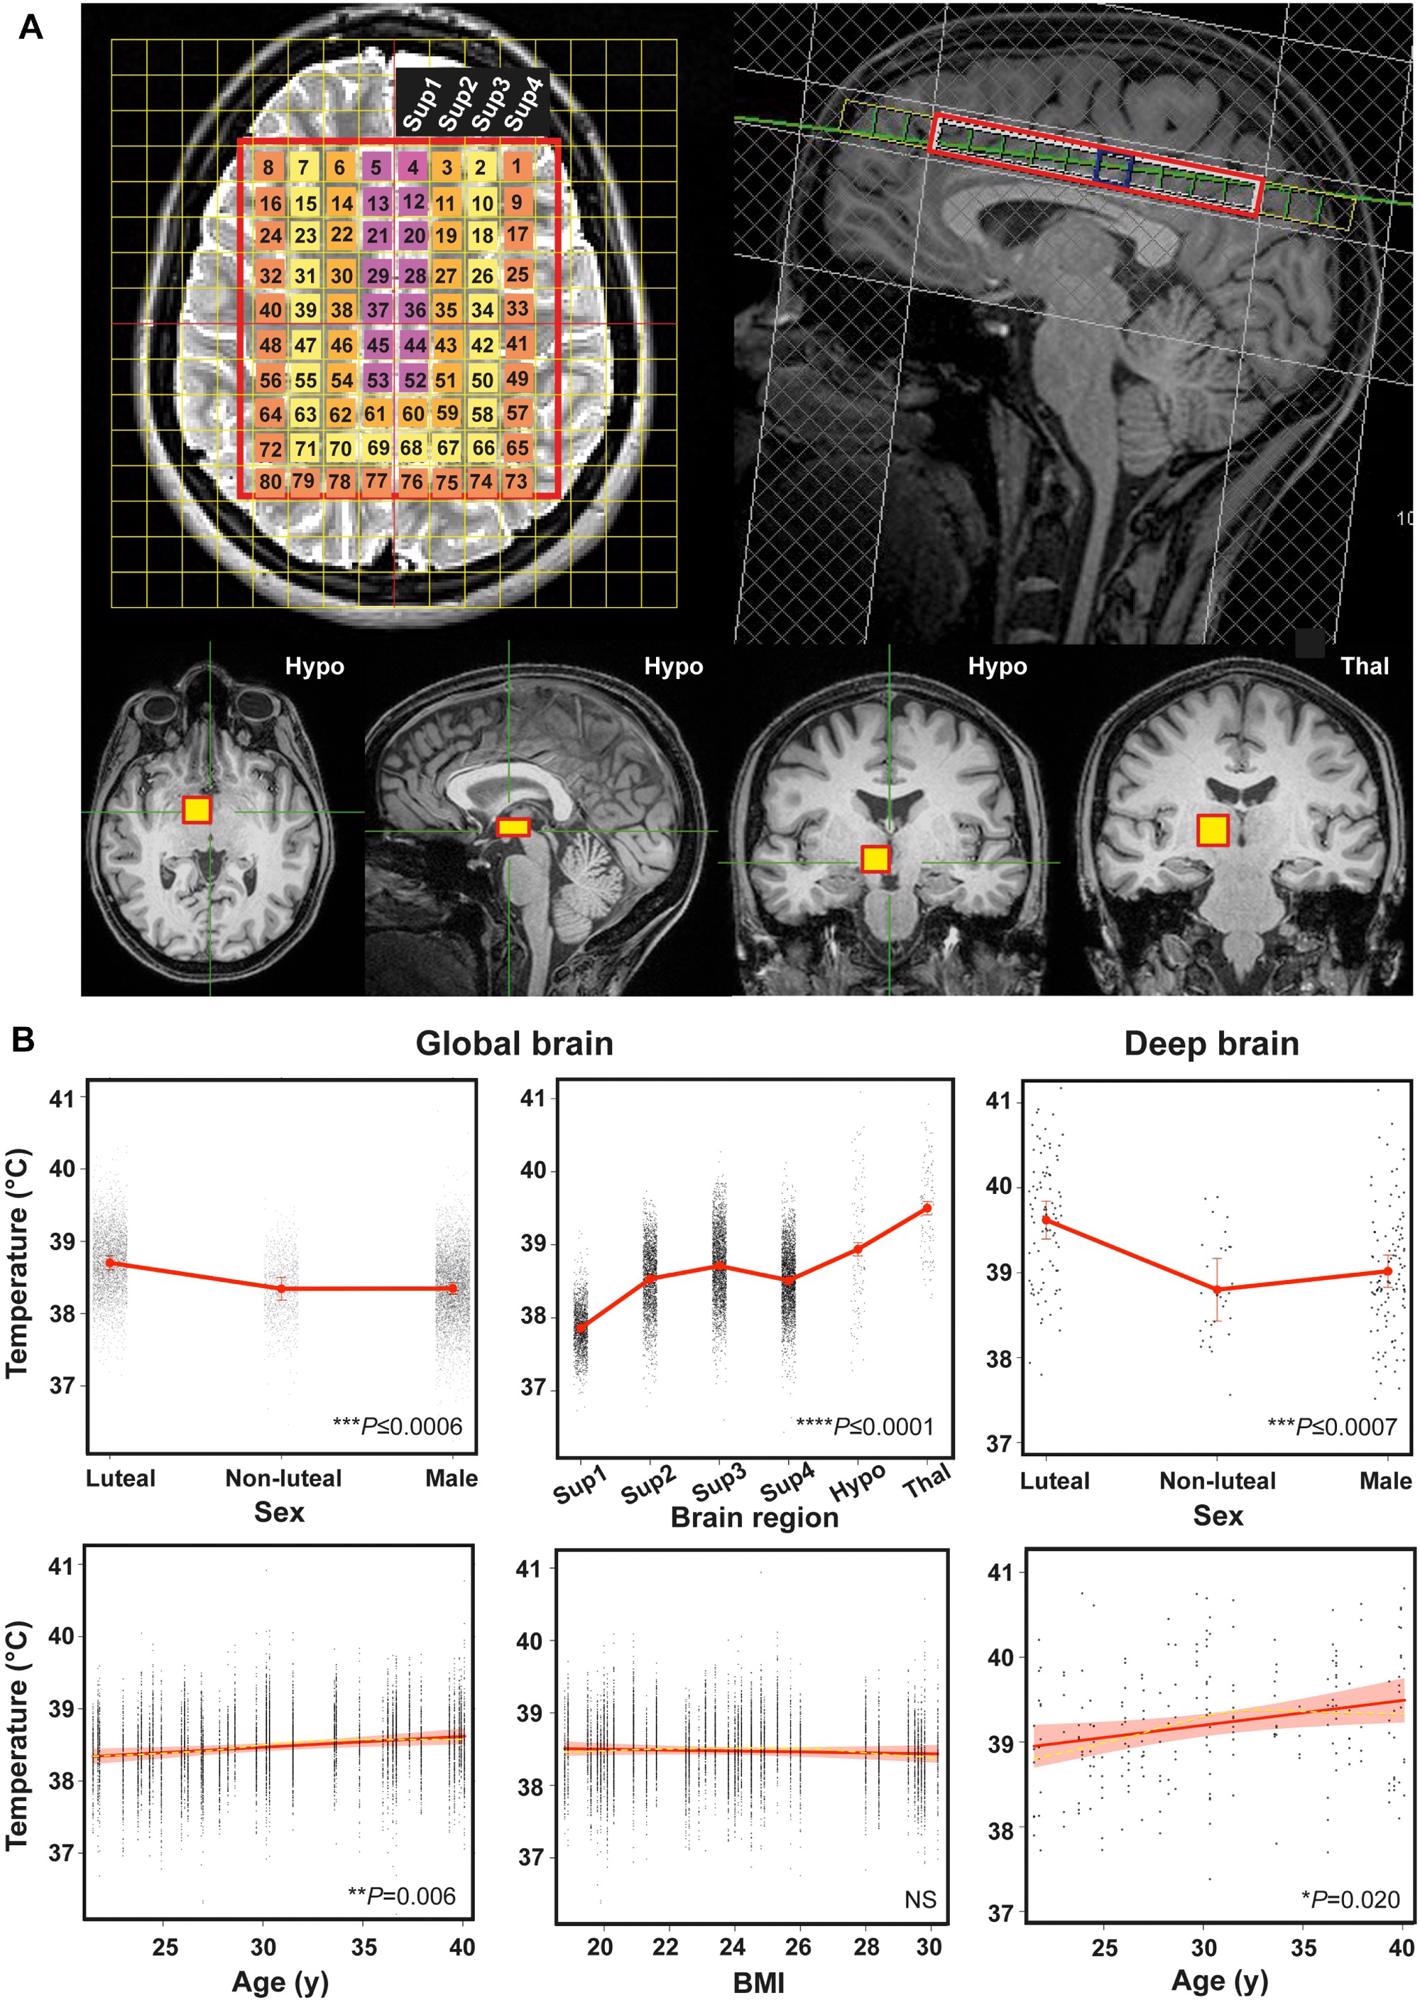 Human brain temperature is spatially heterogenous. (A) Representative annotated MR images to show MRS extraction protocol immediately after whole-brain structural acquisition. T2-weighted axial (top left) and T1-weighted mid-sagittal (top right) image showing multivoxel MRS overlay for more superficial brain regions including cerebral grey and white matter; note positioning superior to corpus callosum. From this multivoxel acquisition, MRS data was extracted from each of the numbered voxels individually; for the final statistical model, the whole cerebral region was split into four superficial groups of voxels (Sup 1–4, depicted as separate colours in the overlay, from medial to lateral). T1-weighted axial, sagittal and coronal images (bottom three images from left side, respectively) showing orthogonal positioning of single voxel in right hypothalamus (yellow box). T1-weighted coronal image (bottom right) showing positioning of single MRS voxel in right thalamus (yellow box).  (B) Linear mixed modelling results for global TBr by sex, age, brain region and BMI, and for deep TBr (including thalamus and hypothalamus) by sex and age. Solid red lines represent model fits, shaded areas and double-ended error bars represent 95% CIs, dark grey circles display residuals (single temperature data-points) and smoothed dashed yellow lines represent partial residuals. For sex, P-value reflects comparisons of each group with luteal females. For brain region, P-value represents comparisons of each region relative to superficial region 1 (parasagittal group of voxels). Sup 1–4 = superficial brain regions 1–4 from medial to lateral; Hypo = hypothalamus; Thal = thalamus.